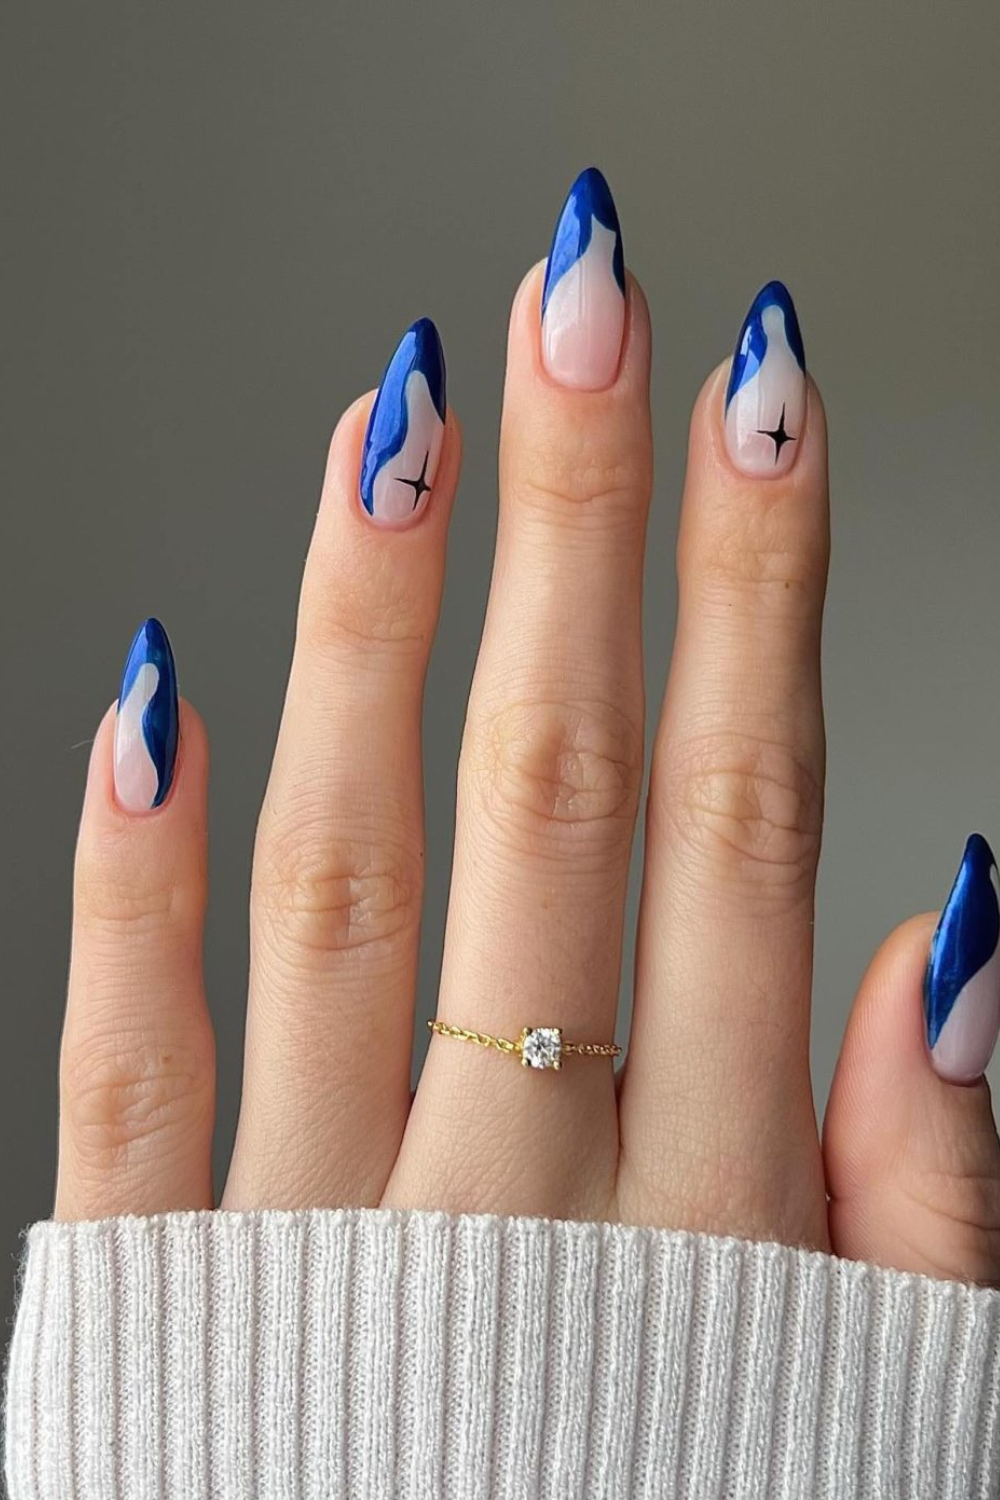 45 Dark Blue Nails To Compliment Your Look!